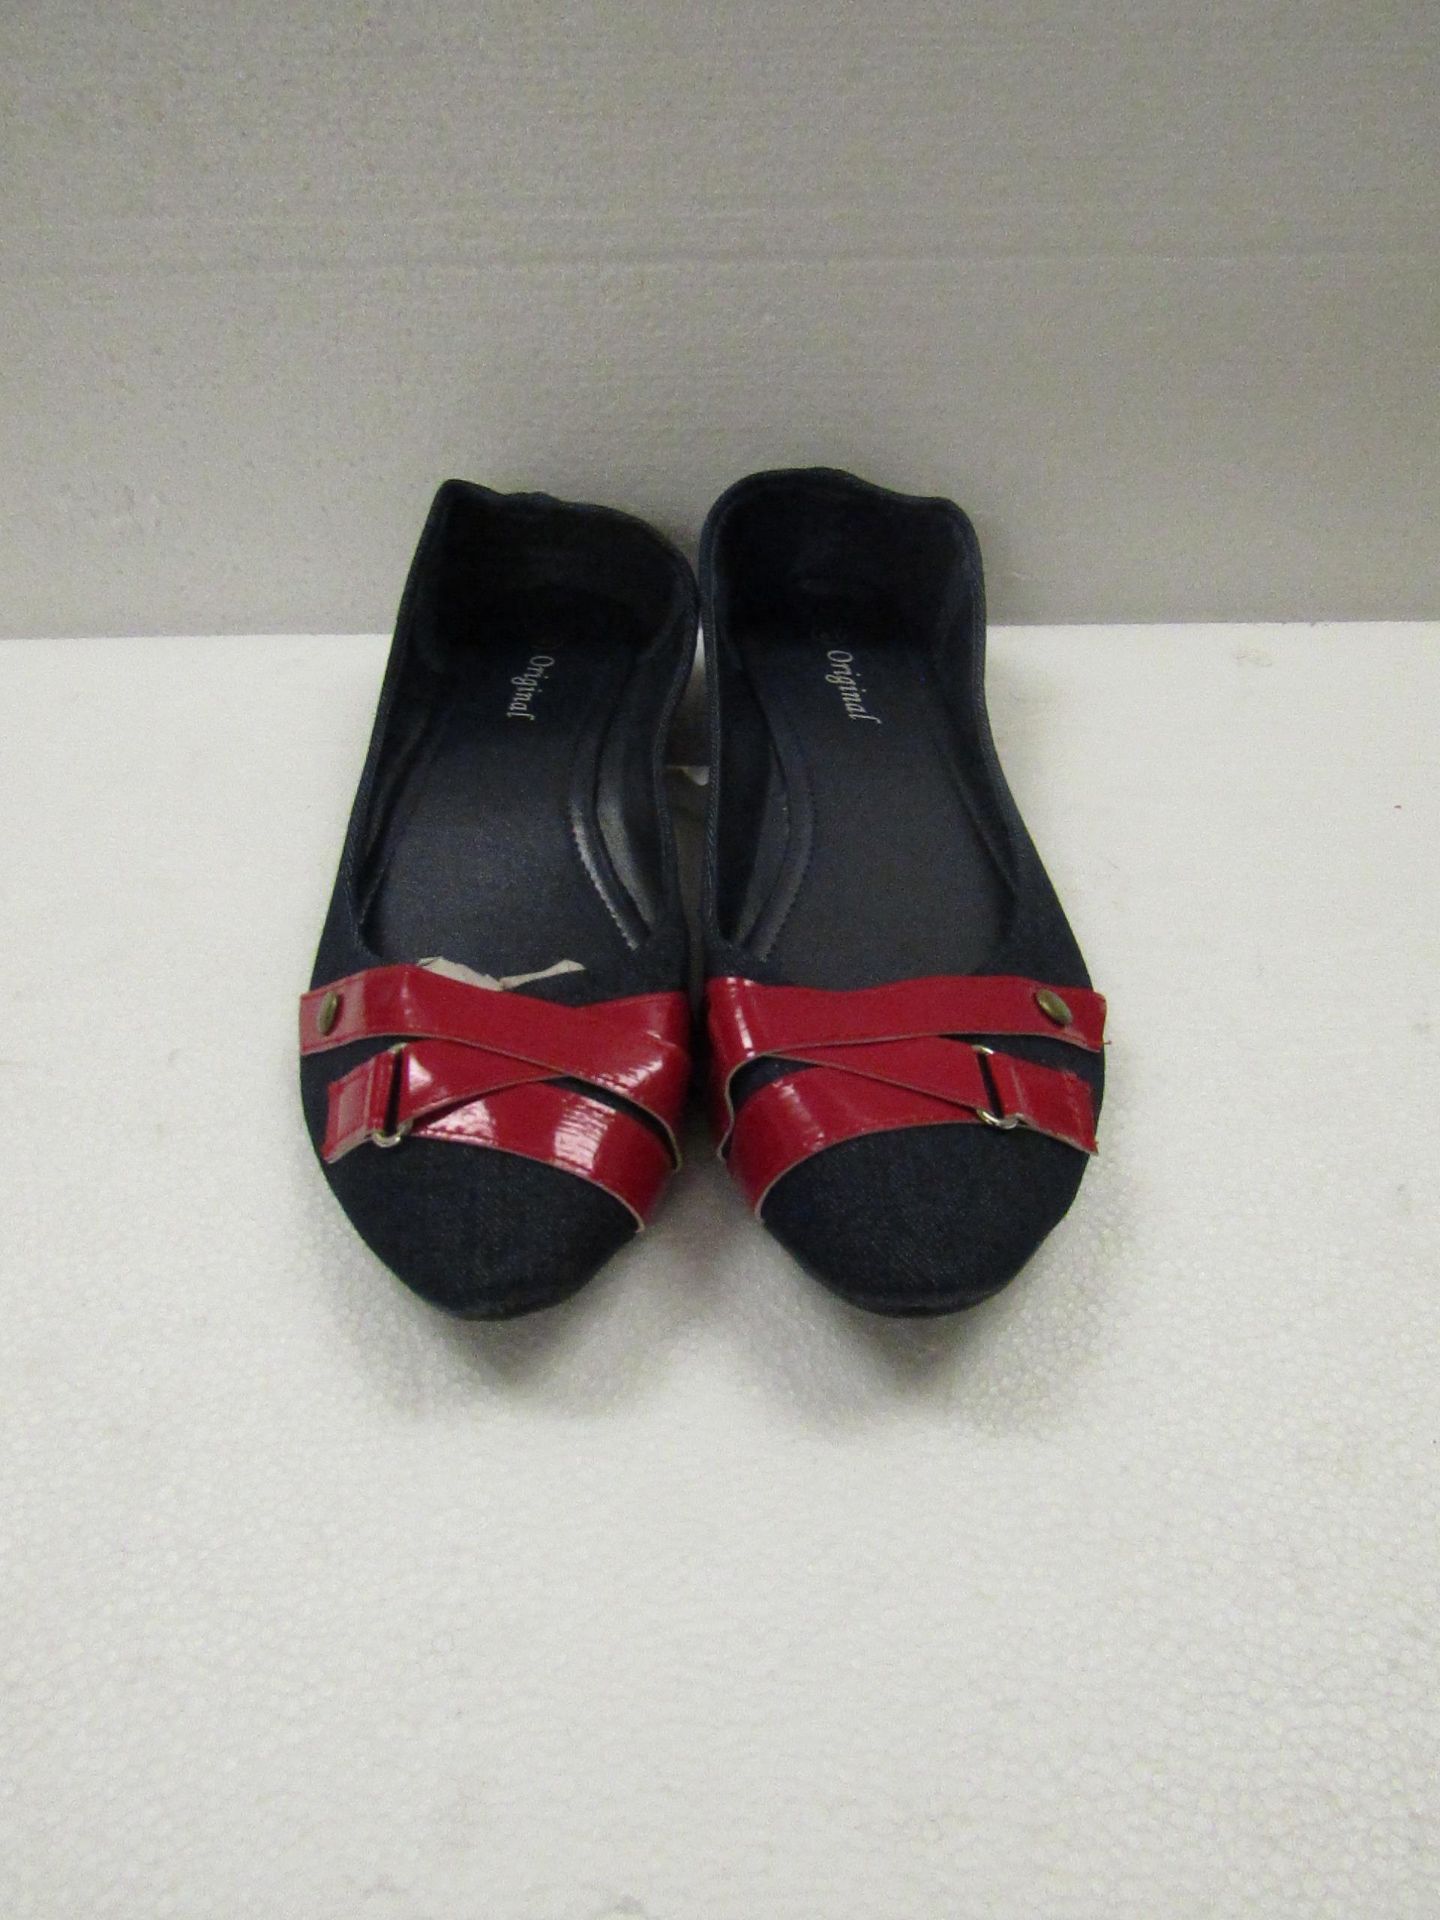 3x Pairs of ladies red band dolly shoes, size37, new & packaged.